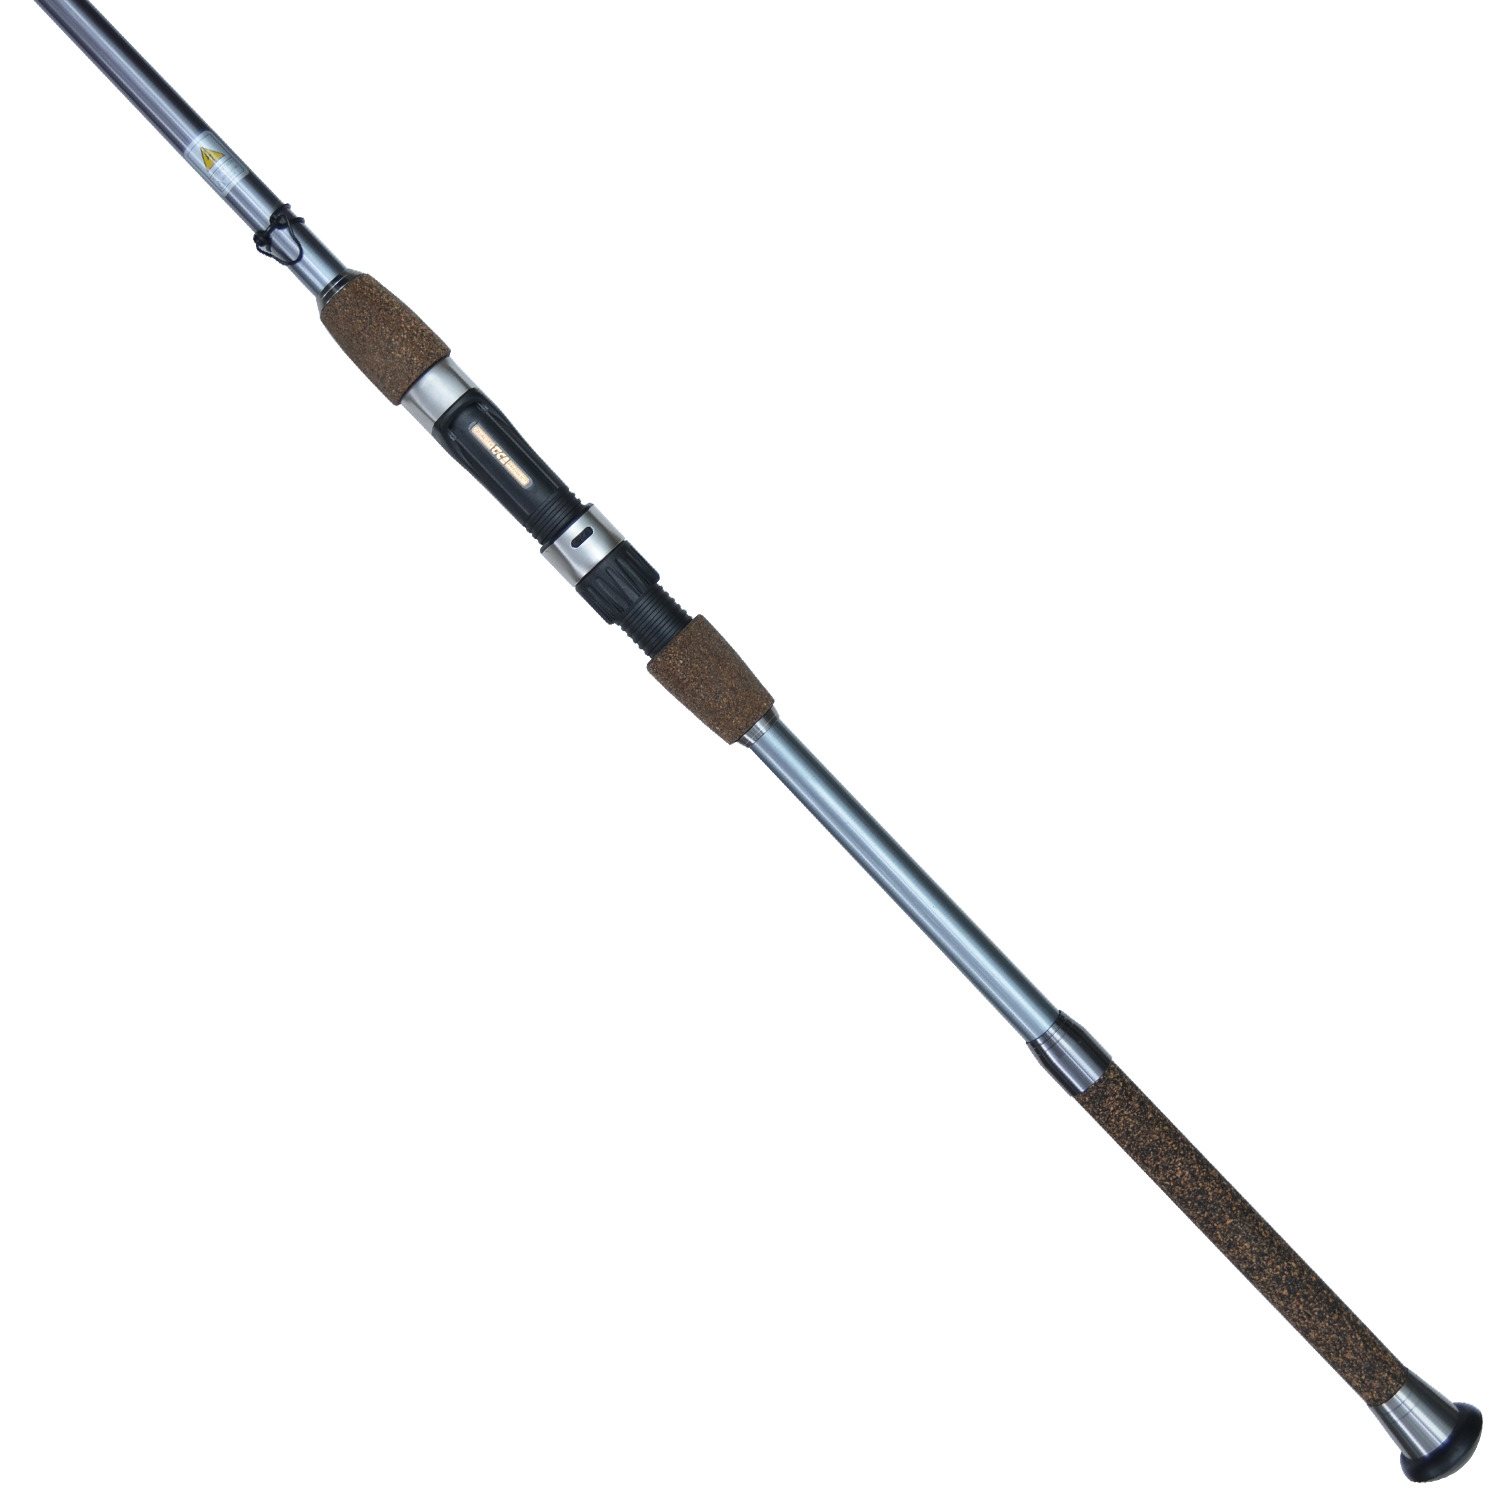 Tica Tica Umga Surf Spin Rod, 1 Piece, Moderate/Fast, Medium-Heavy 3/4-3oz  Lures, 10lb - 25lb, 5 Guides + Tip UMGA70MH1S , $6.00 Off with Free S&H —  CampSaver